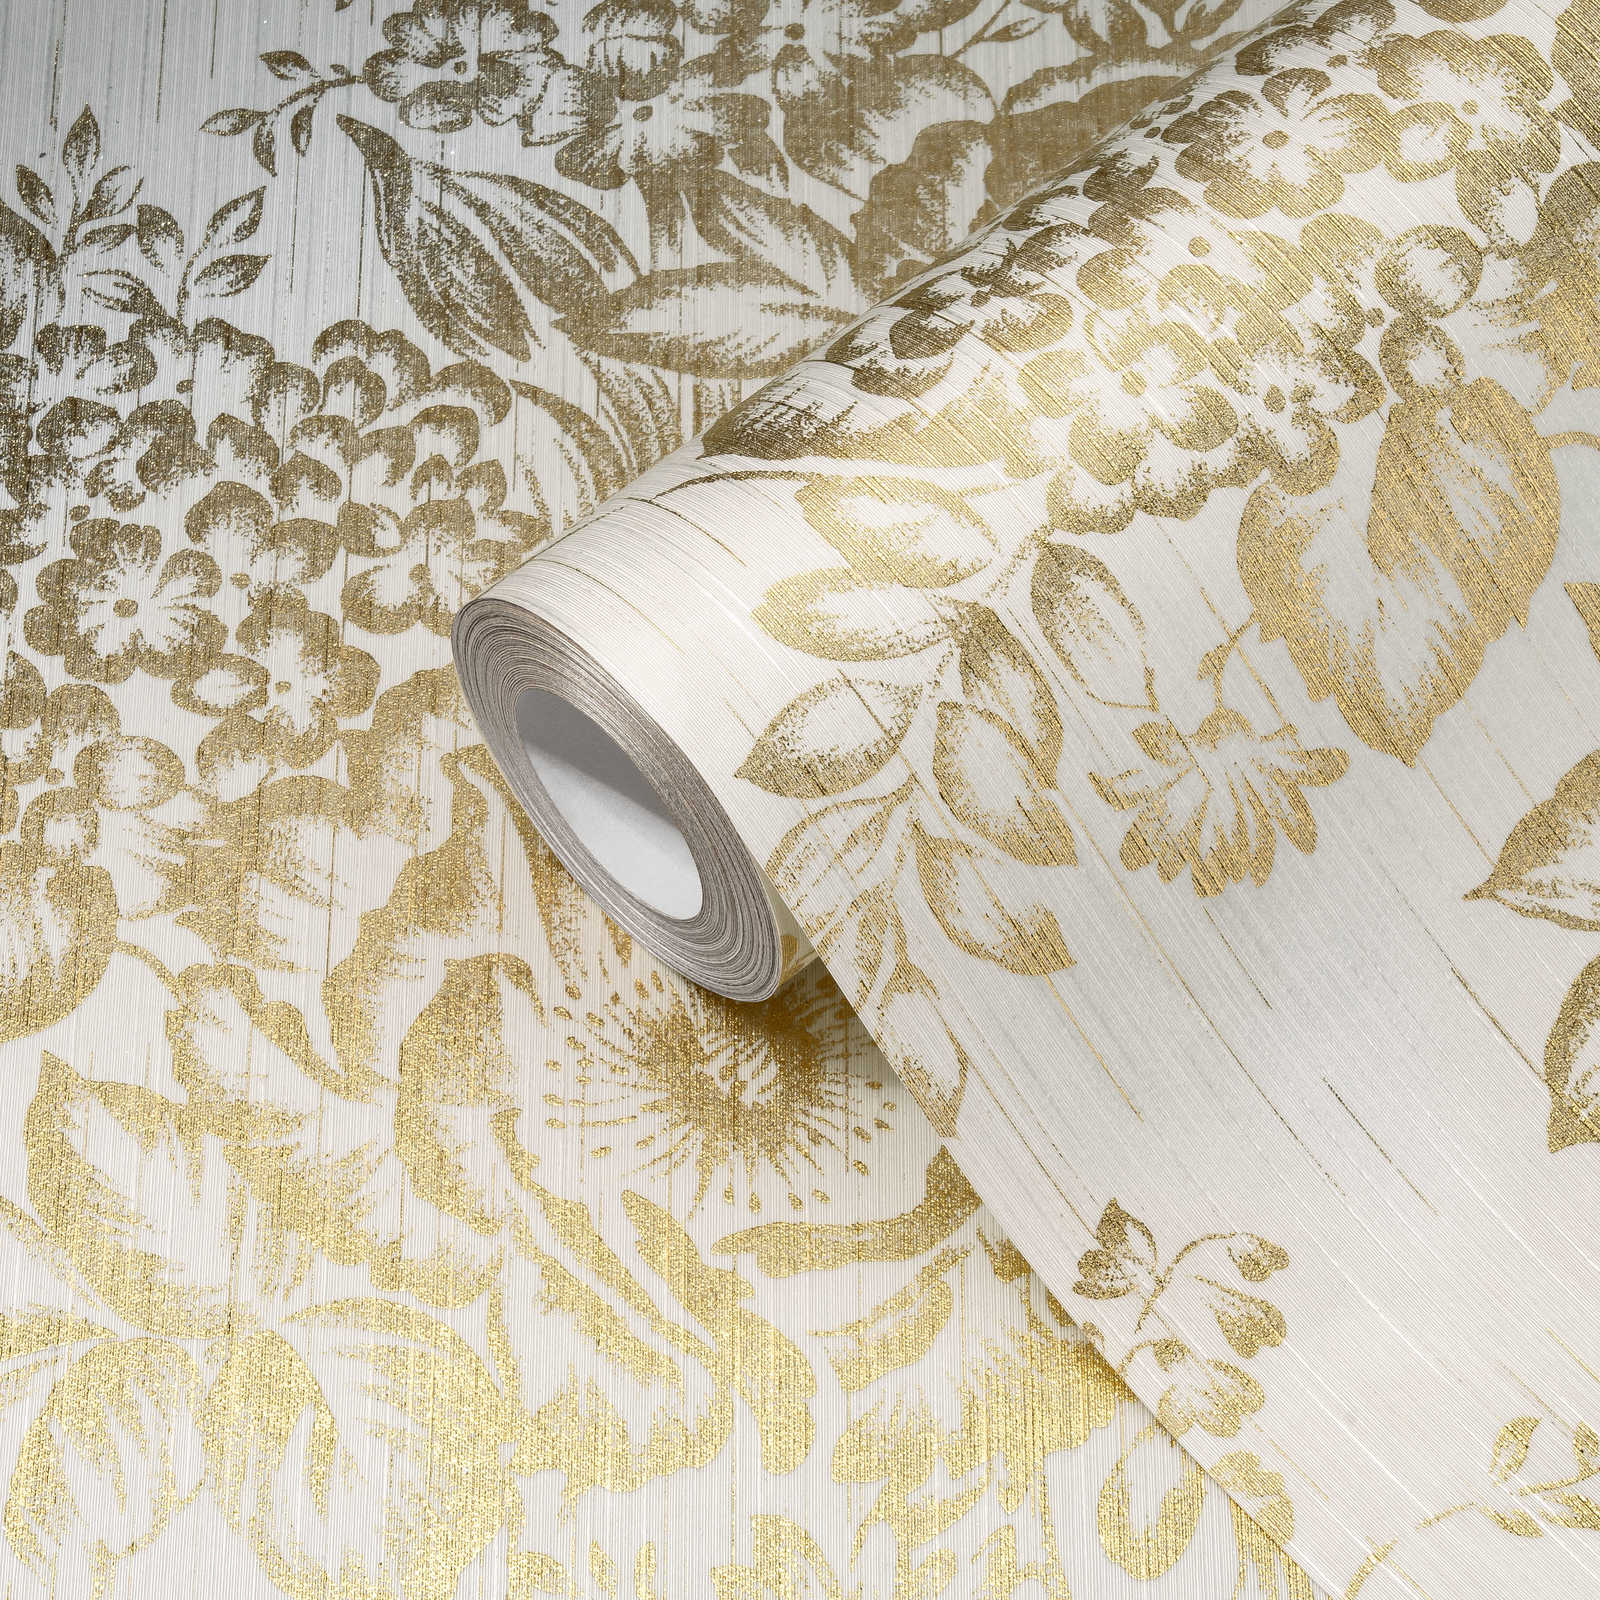             Textured wallpaper with golden floral pattern - gold, white
        